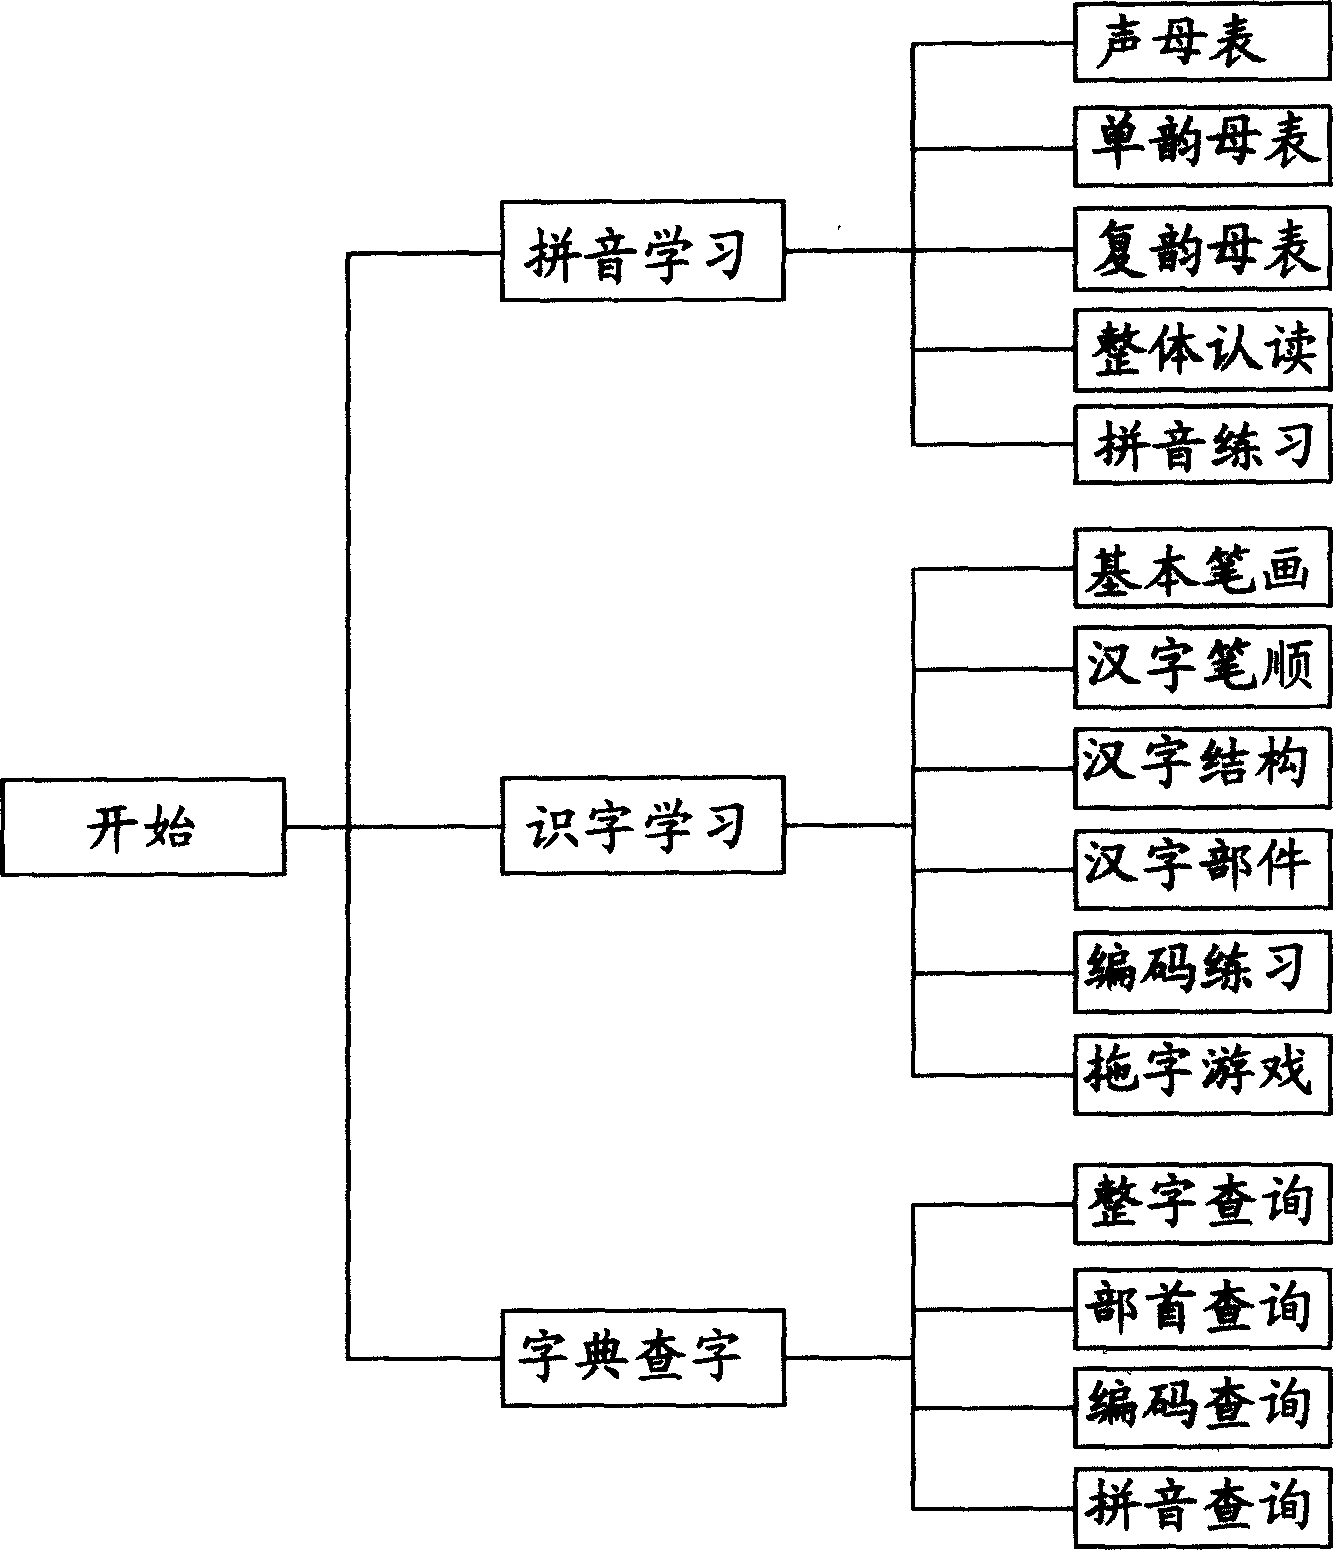 Multiple dimensional Chinese studying systems